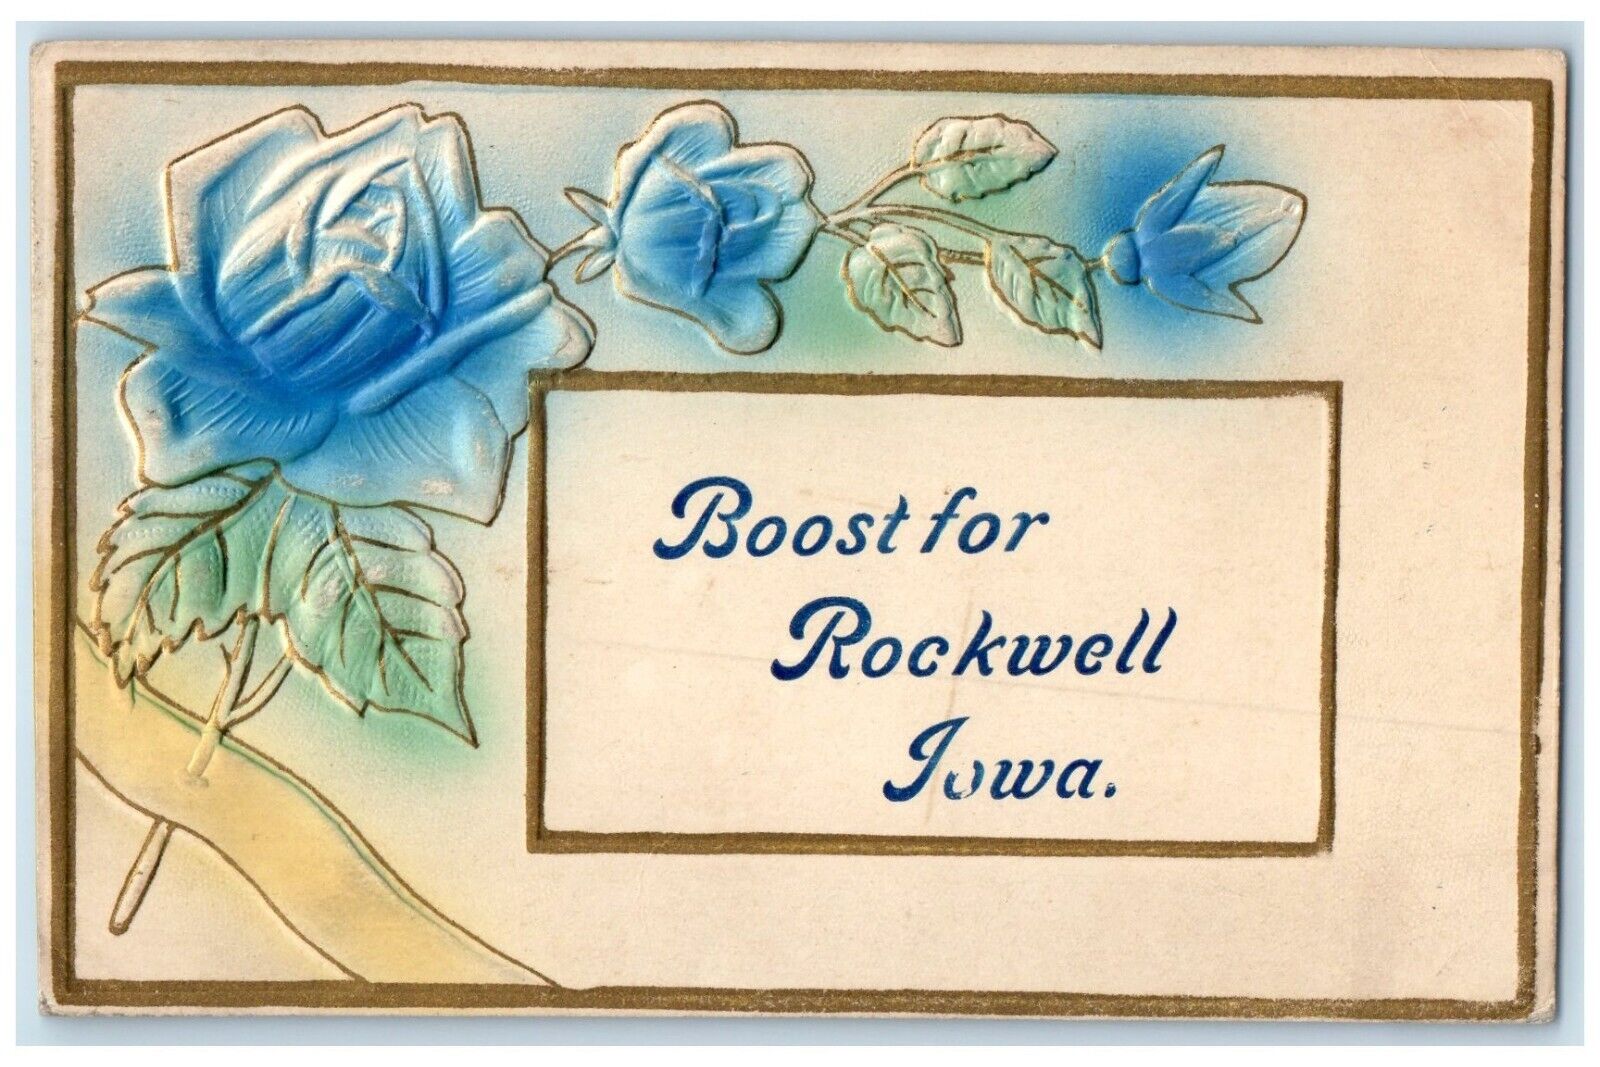 1911 Boost For Flower Embossed Airbrush Rockwell Iowa Vintage Antique Postcard